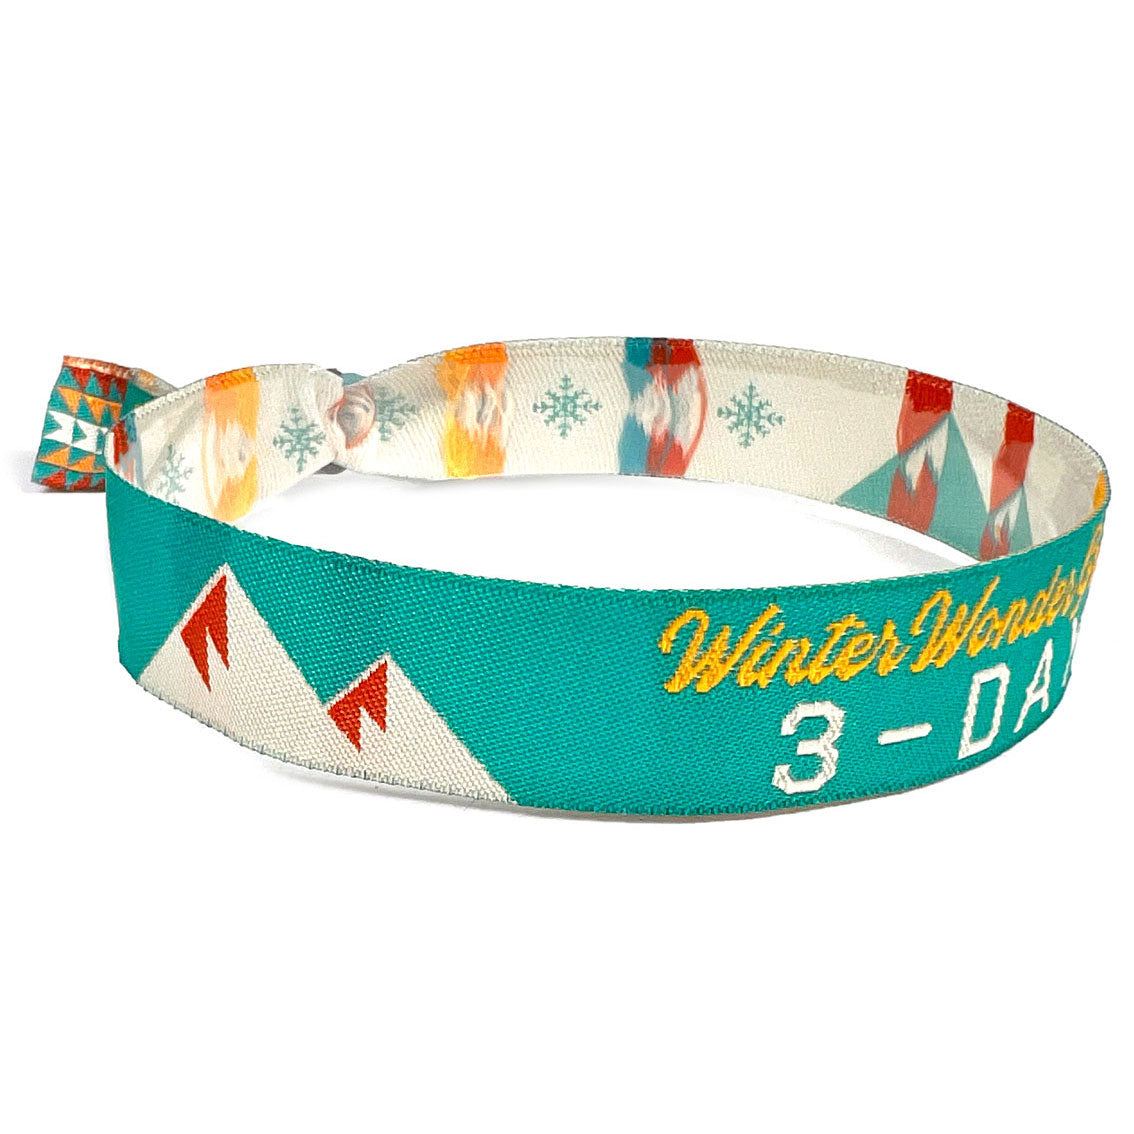 Buy Custom Cloth Wristbands at VolumeDiscounted Pricing  Fast Turnarounds  on Fabric Wristbands